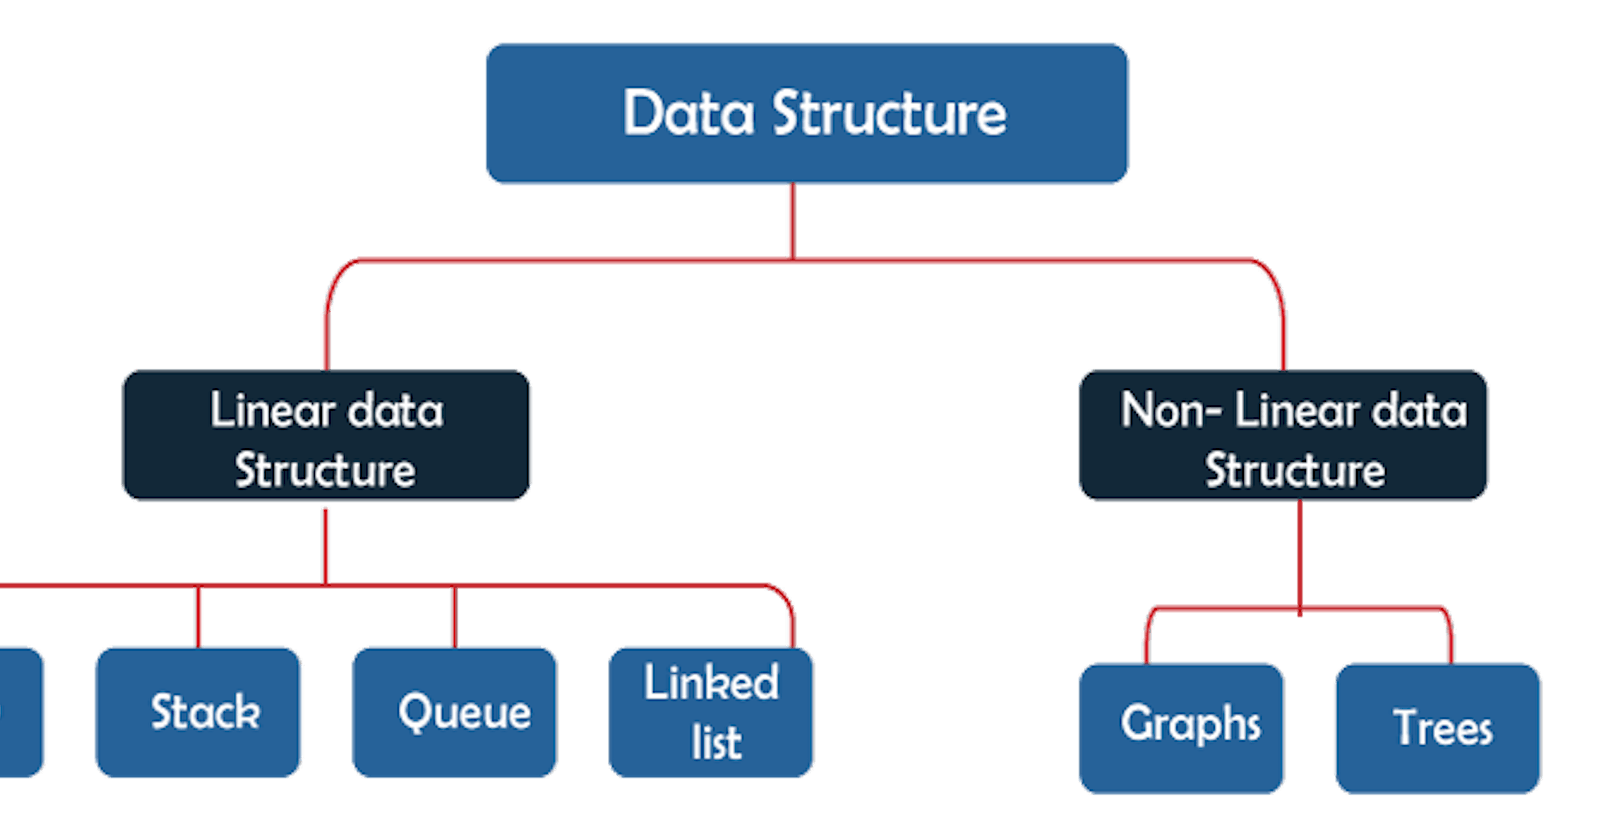 Do Machine Learning Engineers Need To Know Data Structures And Algorithms?